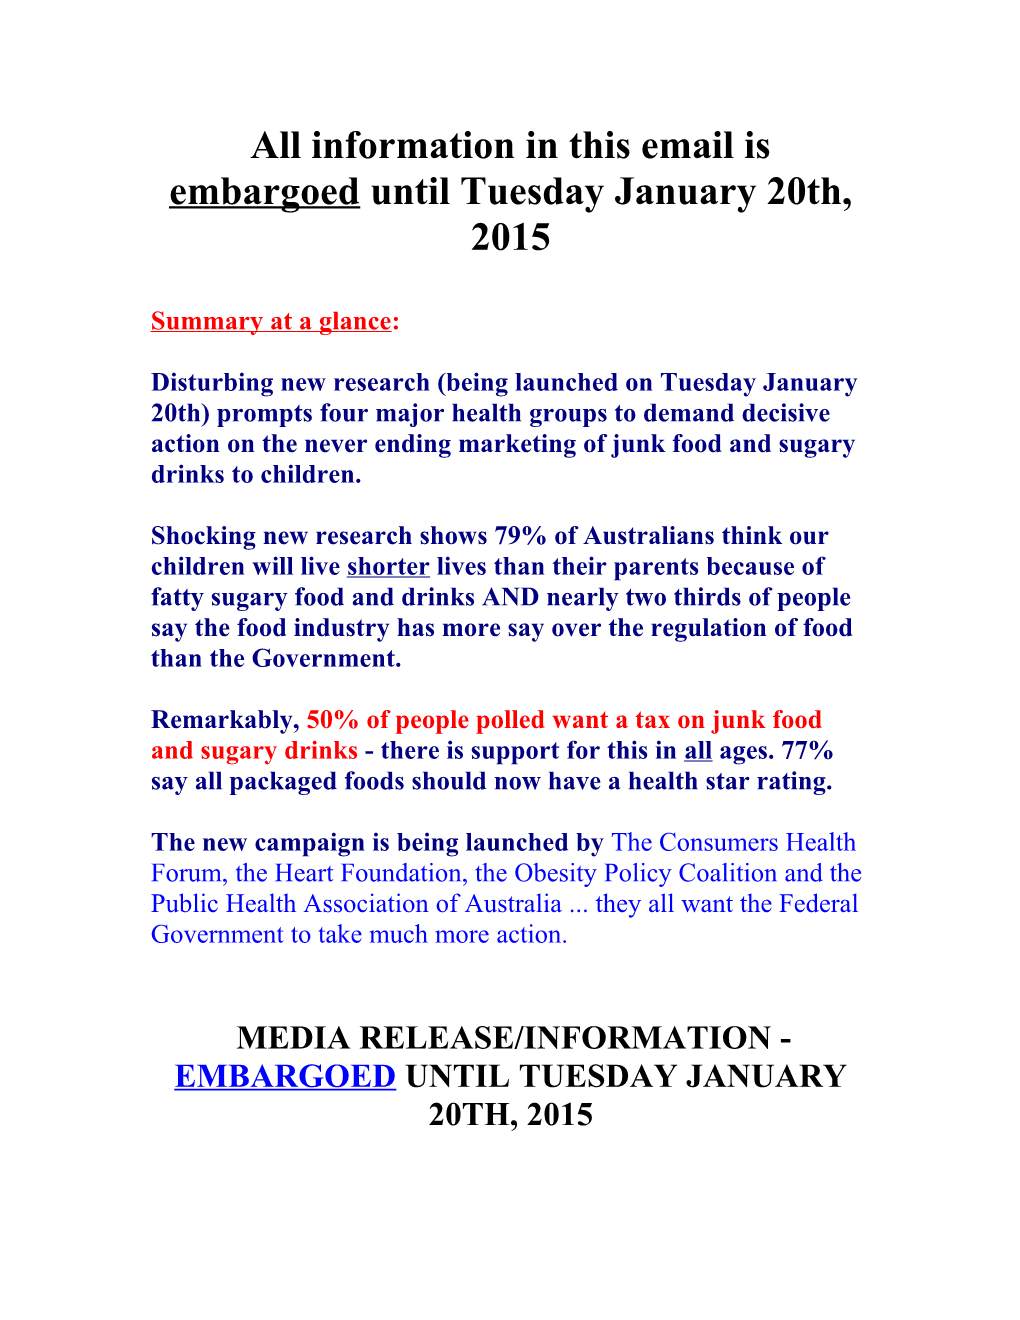 All Information in This Email Is Embargoed Until Tuesday January 20Th, 2015